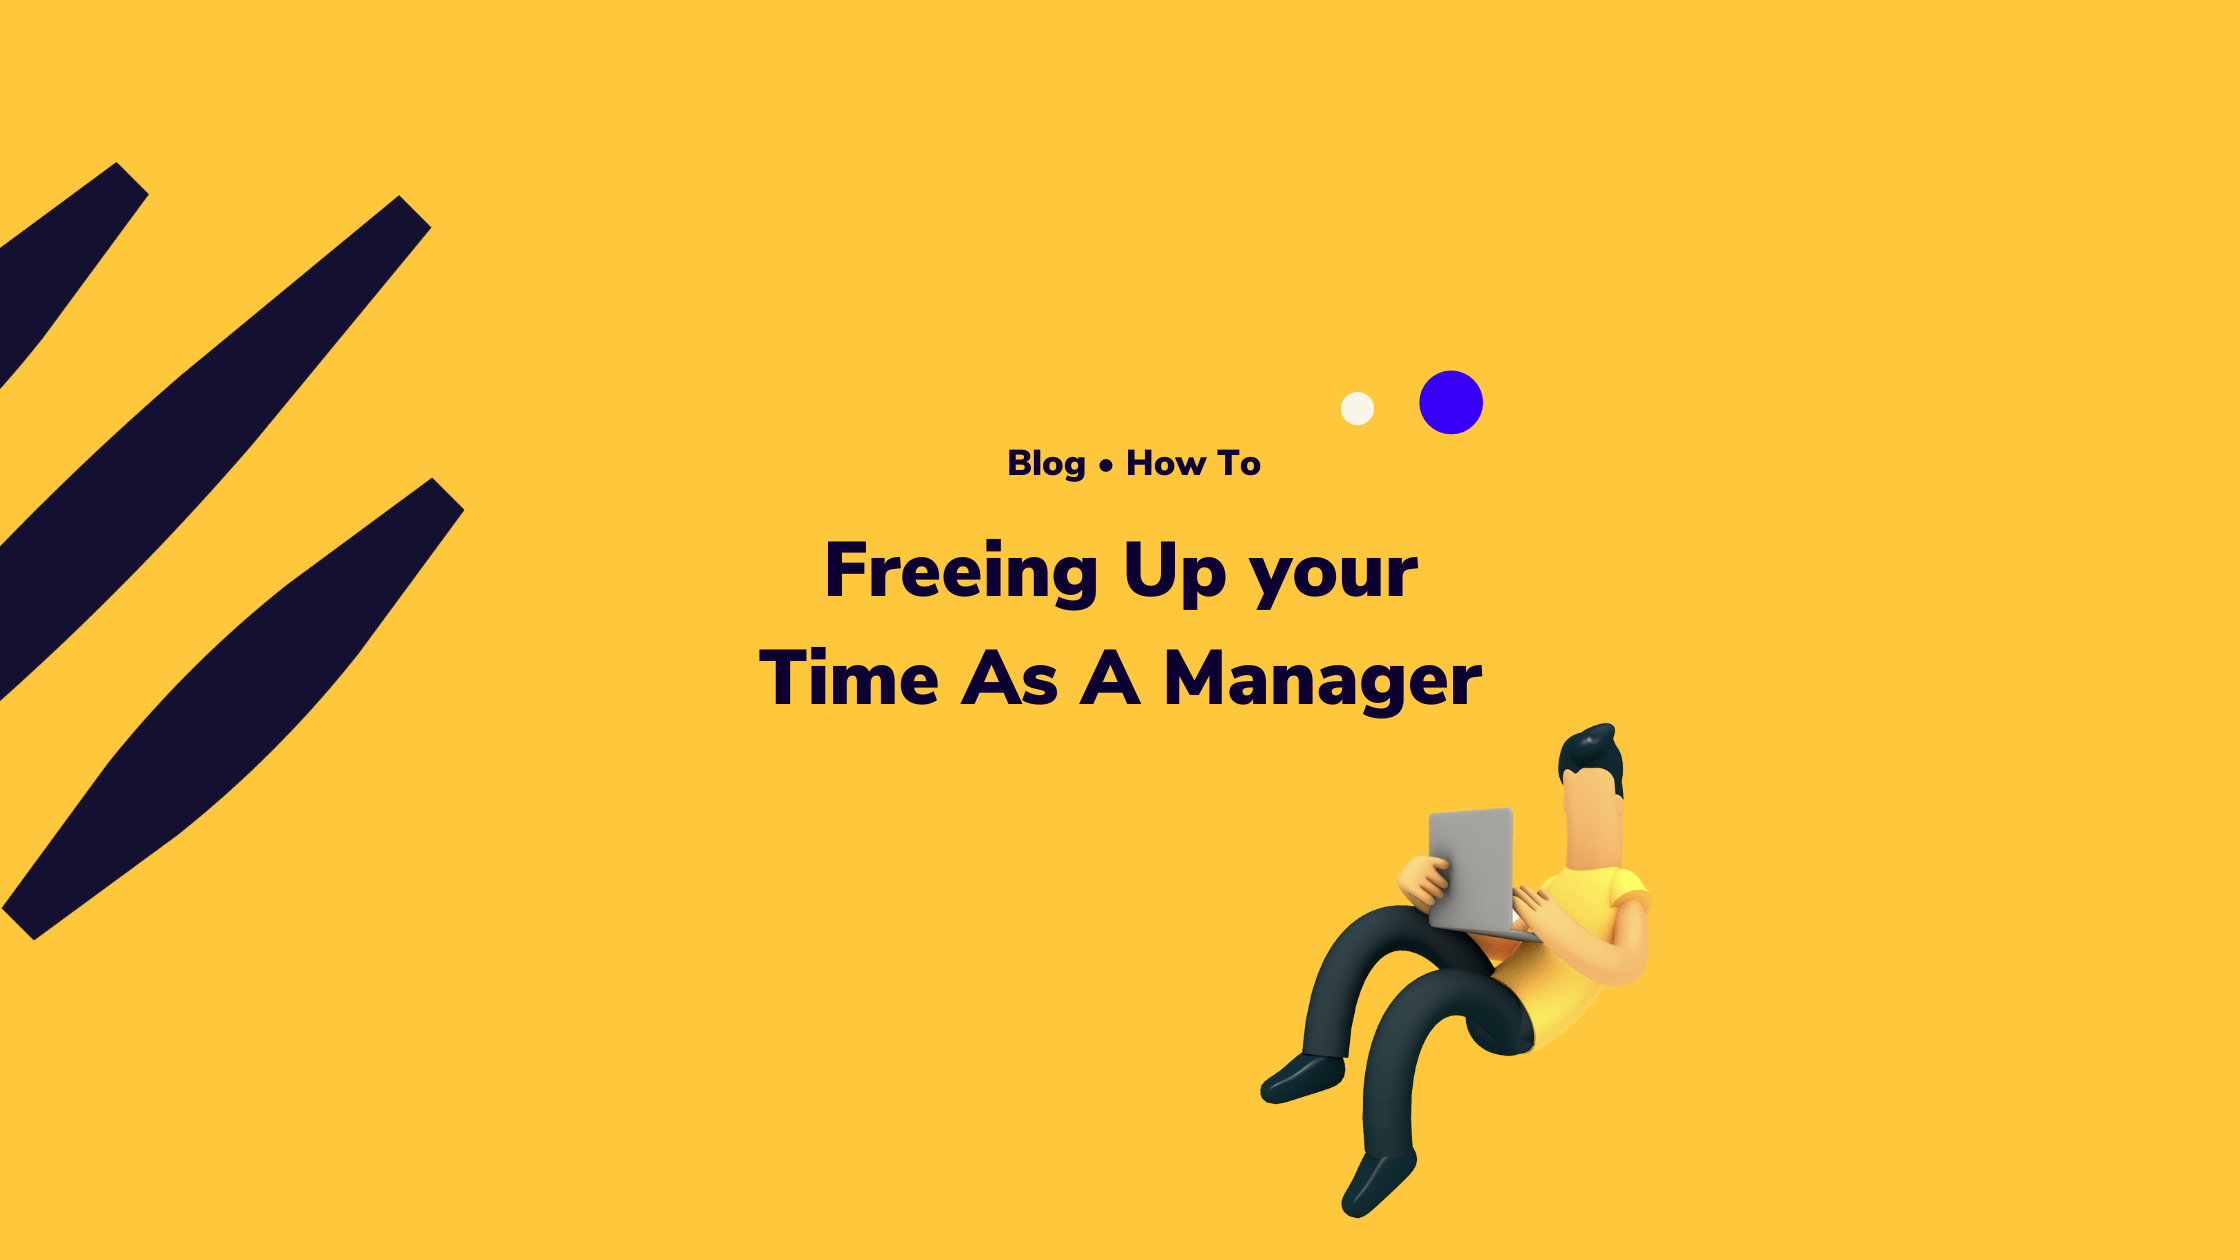 As a manager, free up time in the agenda